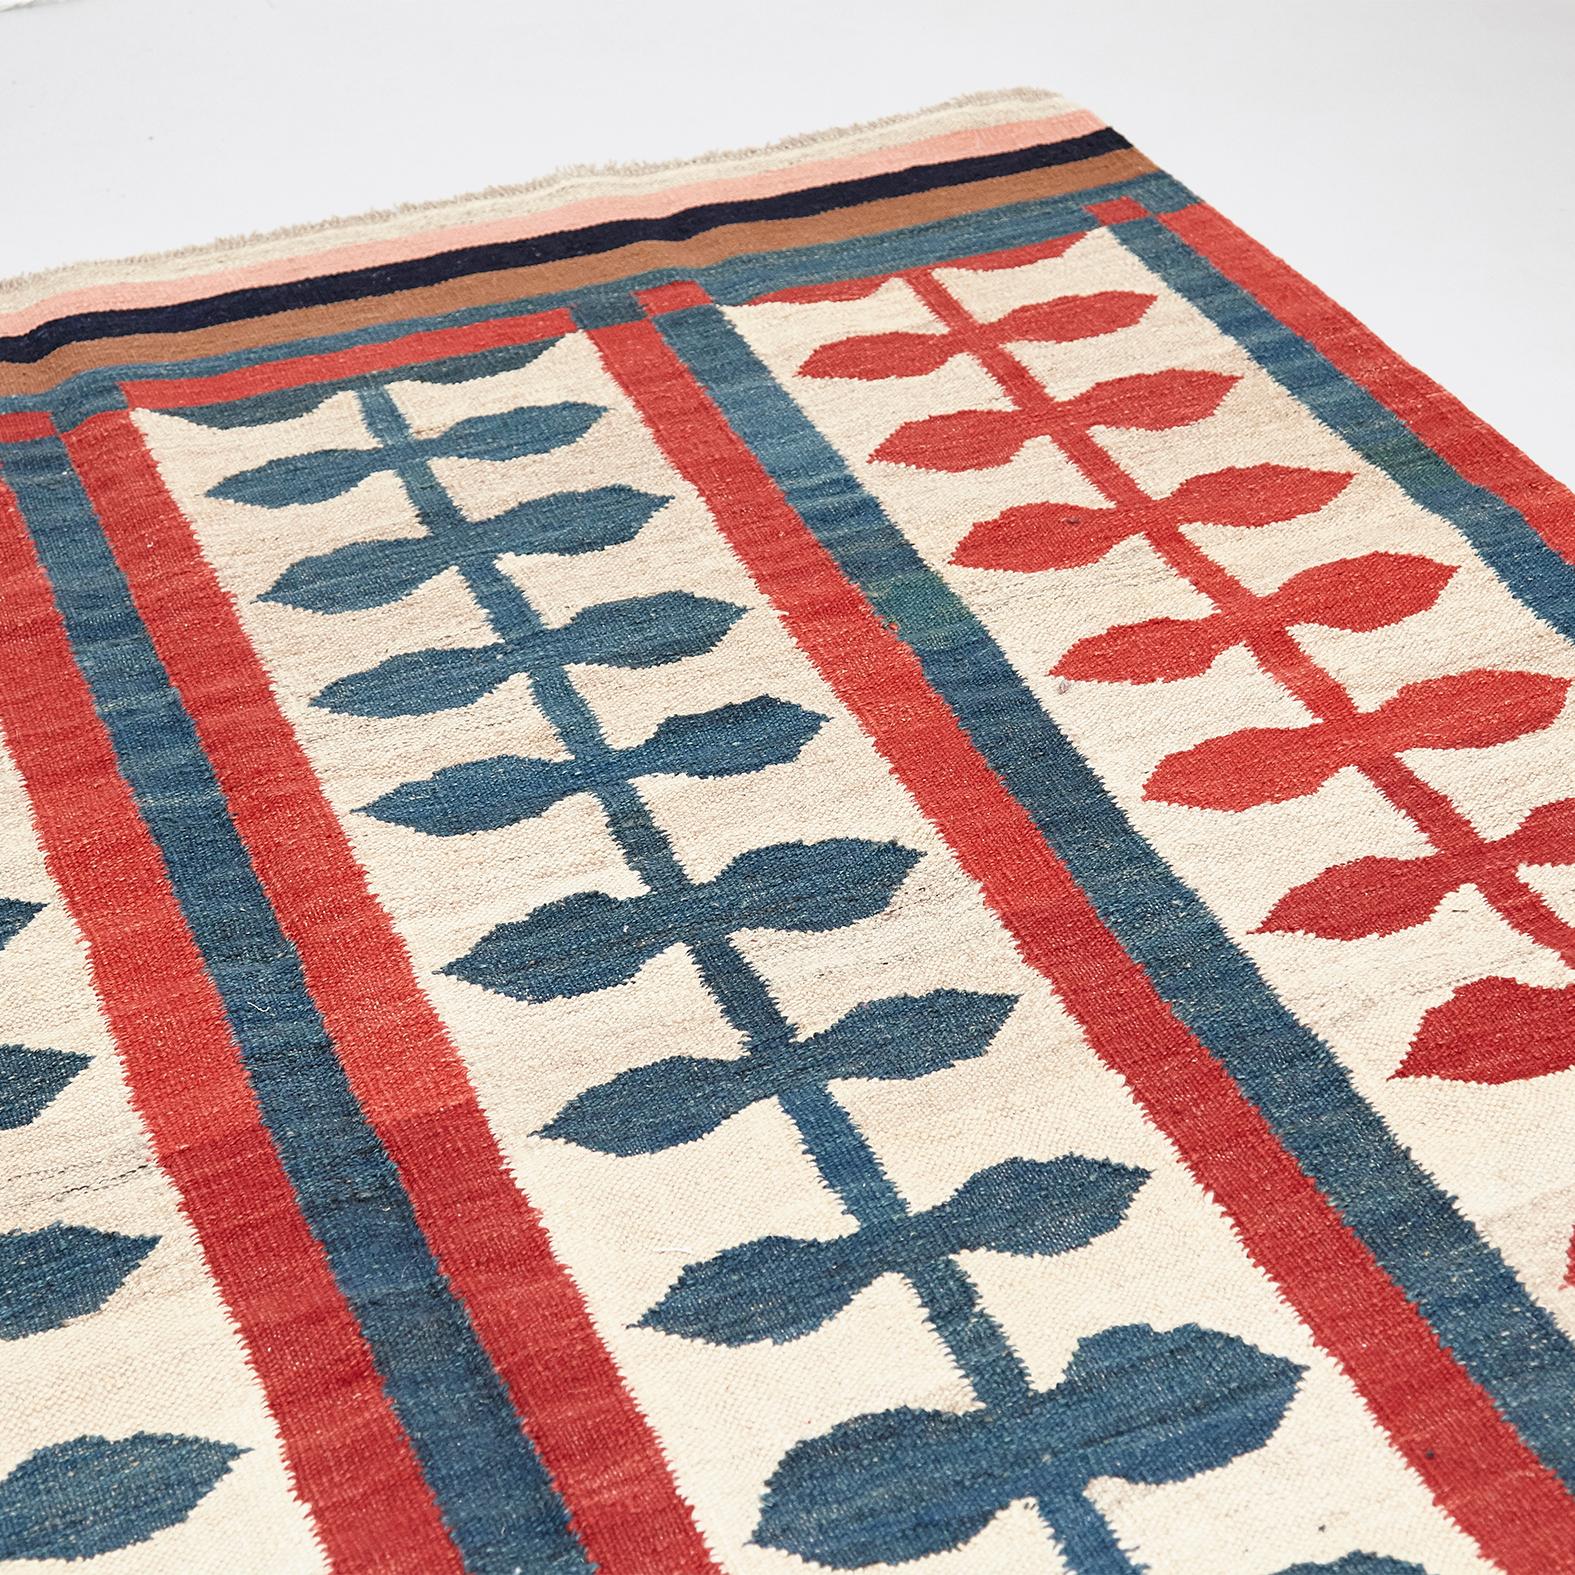 Mid-20th Century Large Colorful Flat-Weave Rug